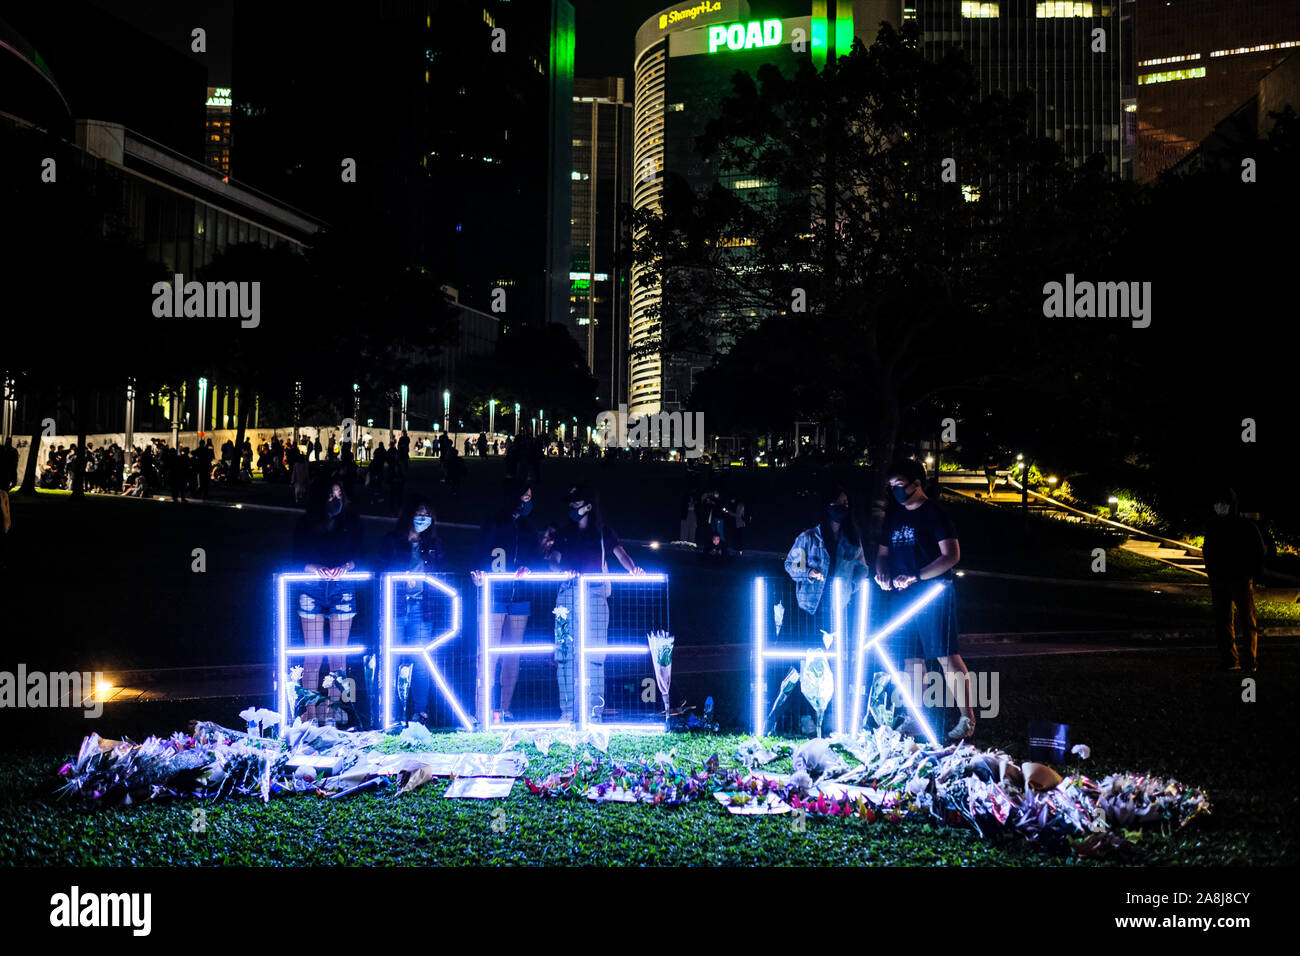 Hong Kong, China. 9th Nov, 2019. A Free HK sign is seen during a memorial rally at Tamar Park in Hong Kong to mourn the death of a 22 years old university student Alex Chow Tsz Lok, who died from a serious brain injury during a fall on November 4th as police skirmished with demonstrators last weekend. He was left in critical condition and died after suffering a cardiac arrest on Friday. Credit: Keith Tsuji/ZUMA Wire/Alamy Live News Stock Photo